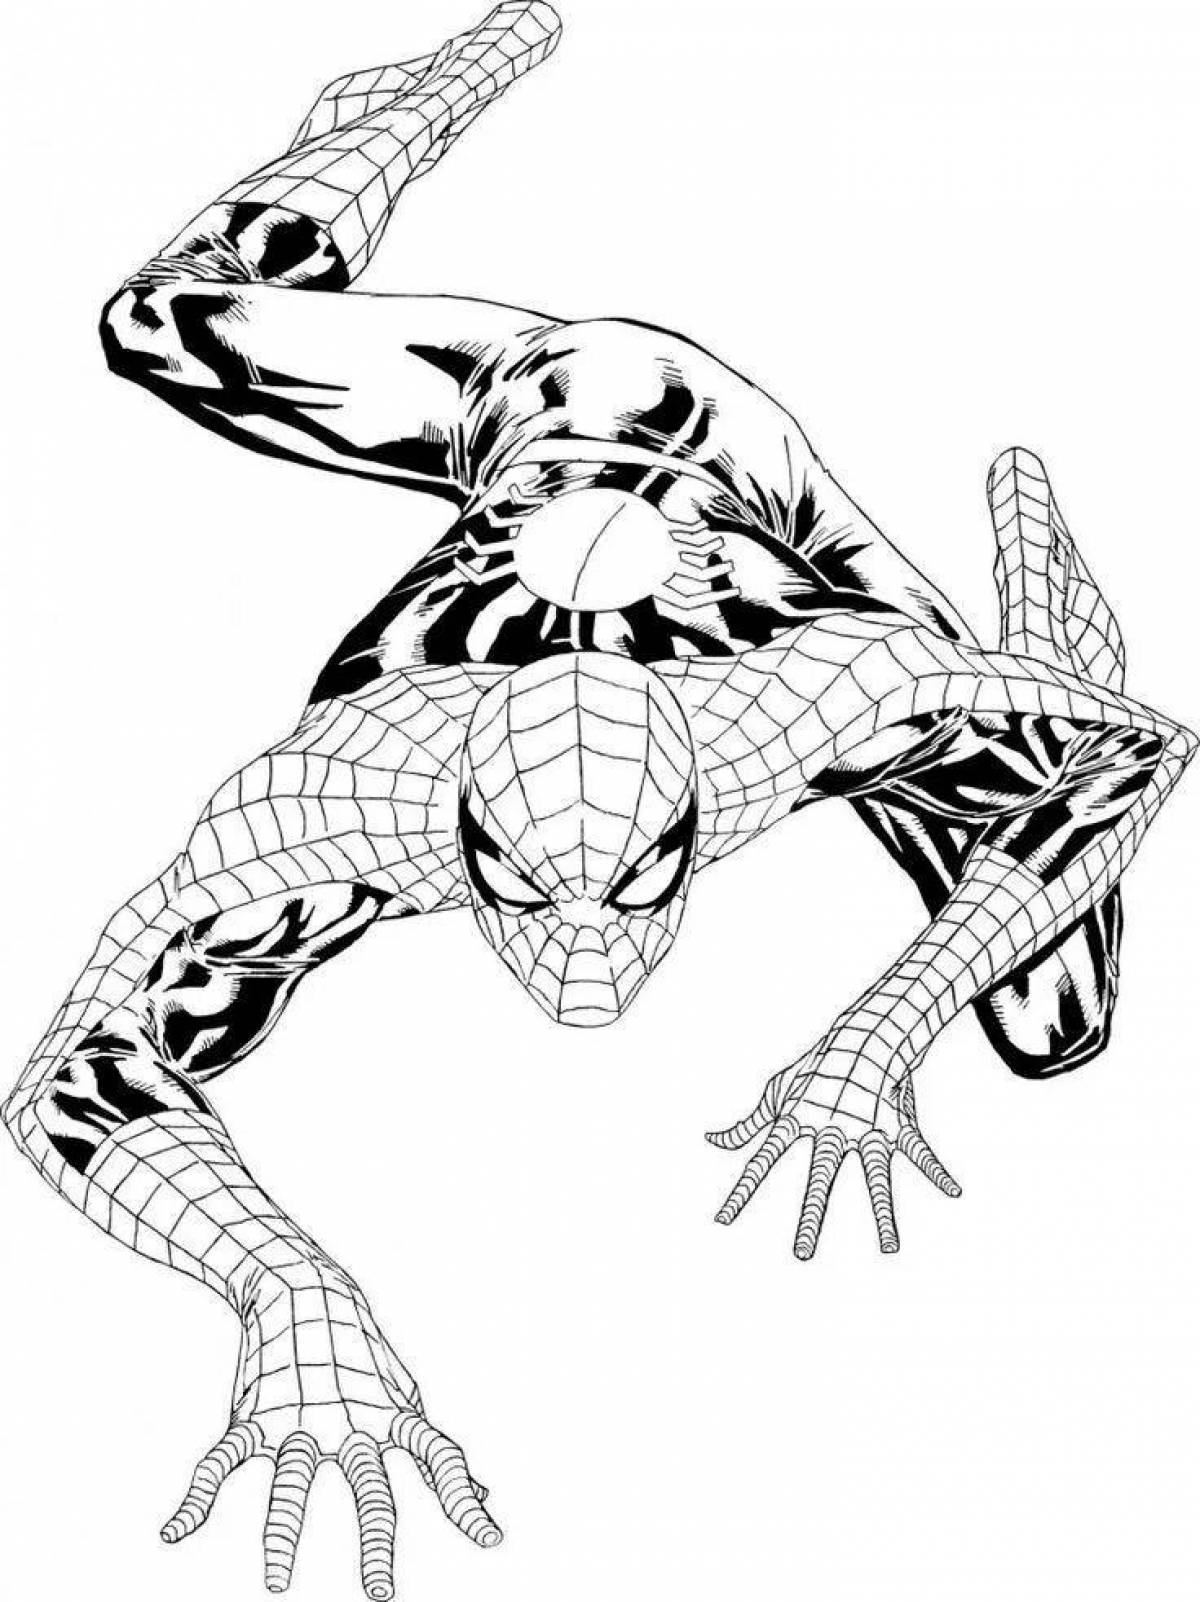 Dazzling drawing of Spiderman